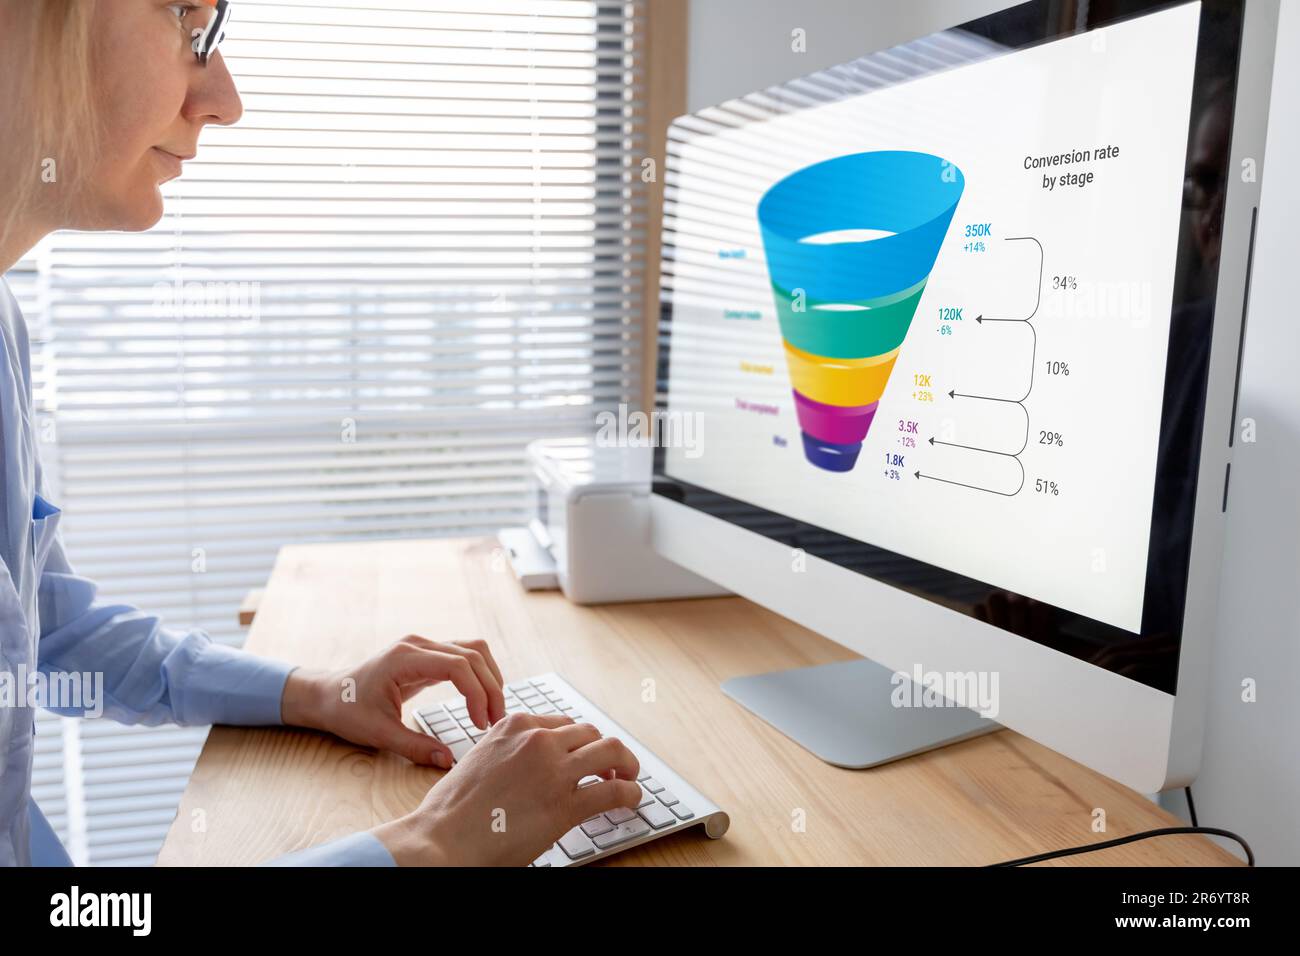 Marketing funnel and data analytics used by a sales consultant to analyze leads generation, conversion rate, and sales performance of e-commerce. Mult Stock Photo